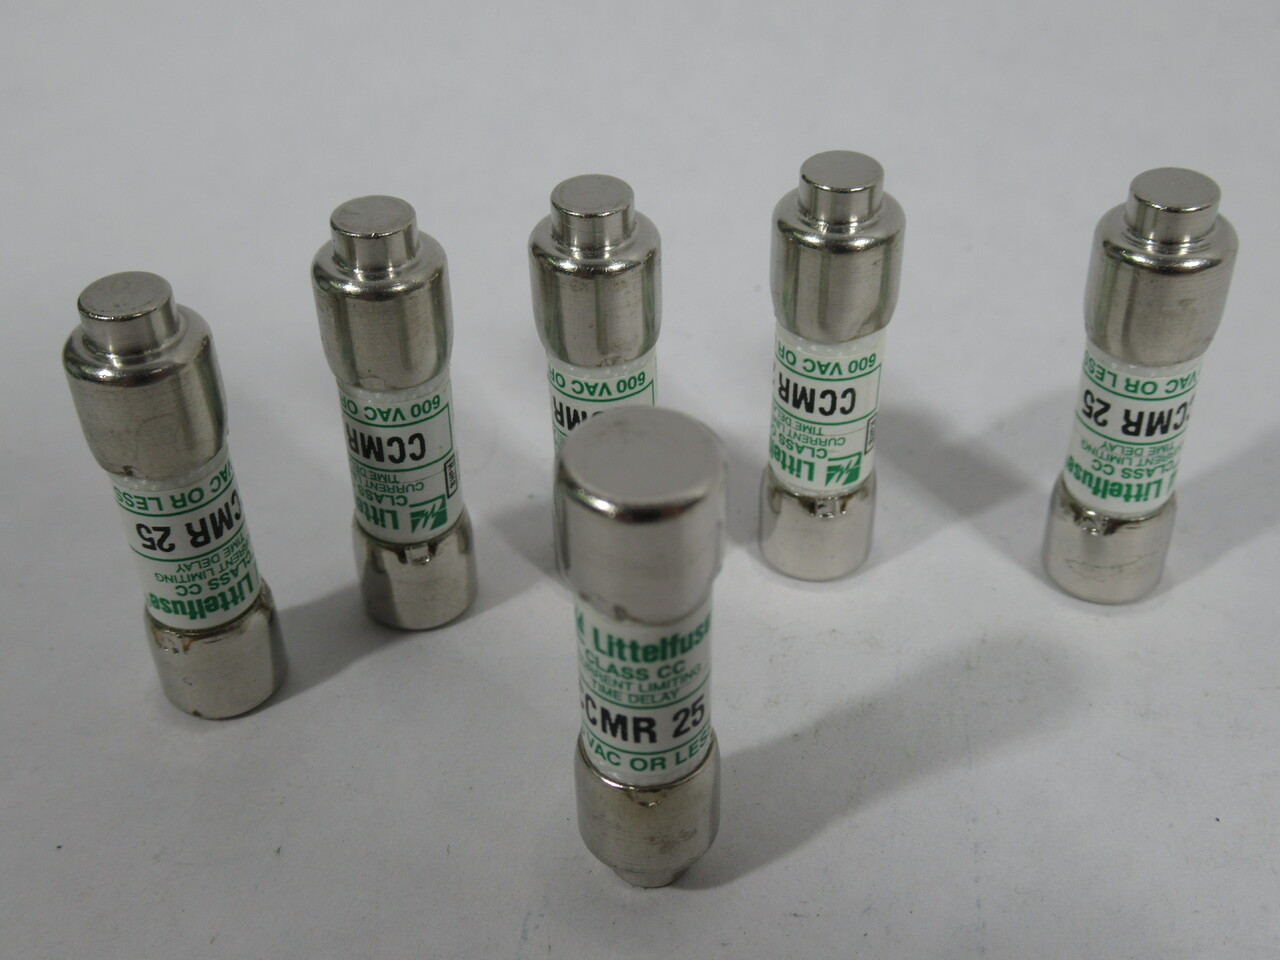 Littelfuse CCMR-25 Time Delay Current Limiting Fuse 25A 600V Lot of 6 NEW